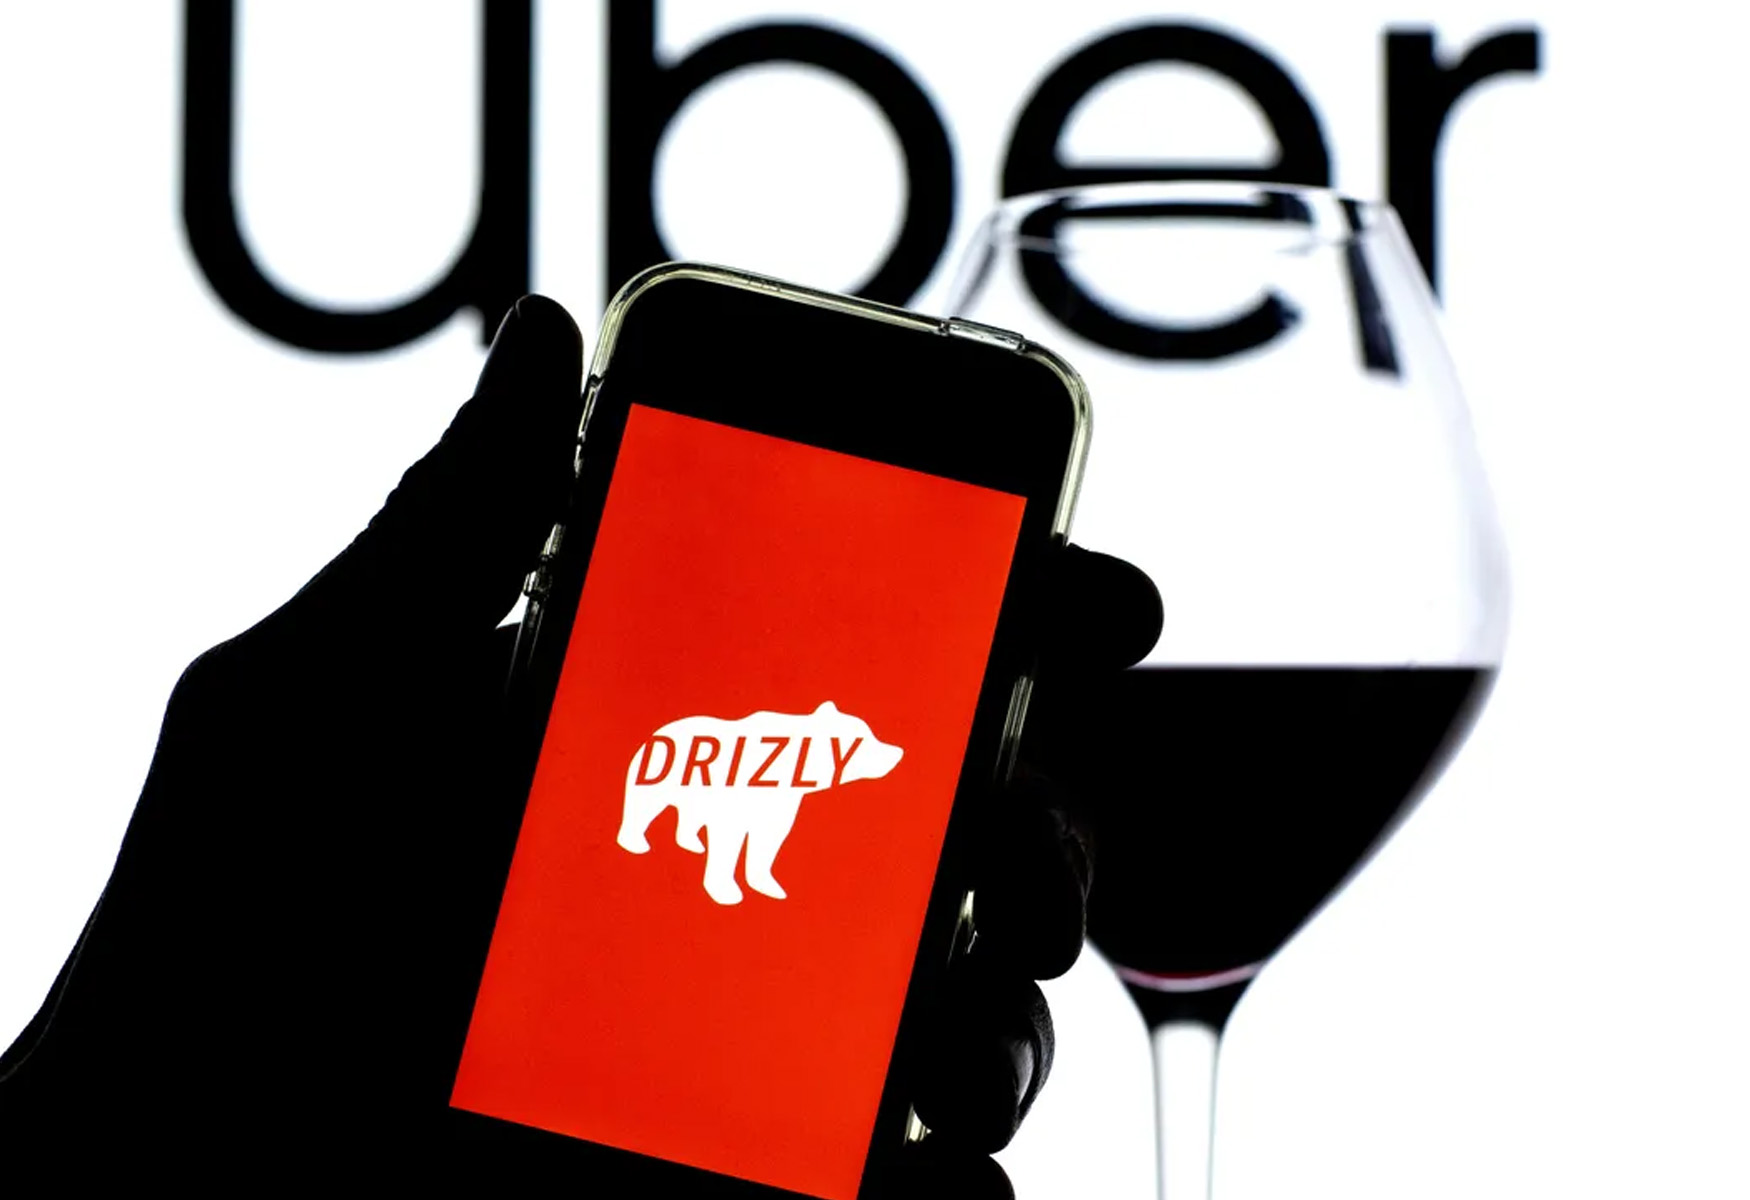 uber-to-shut-down-drizly-alcohol-delivery-service-after-three-years